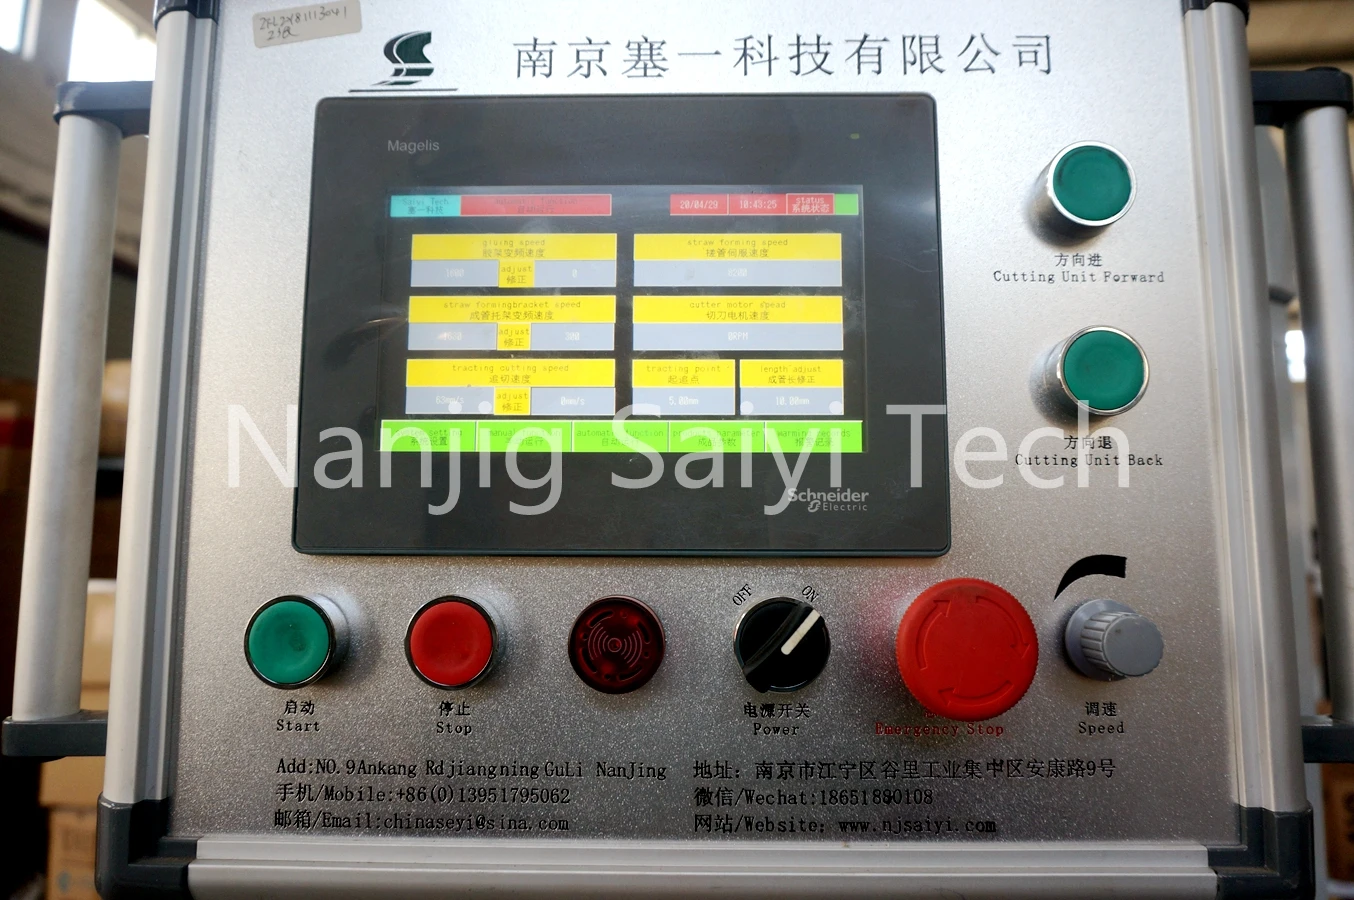 Machinery for making paper drinking straw